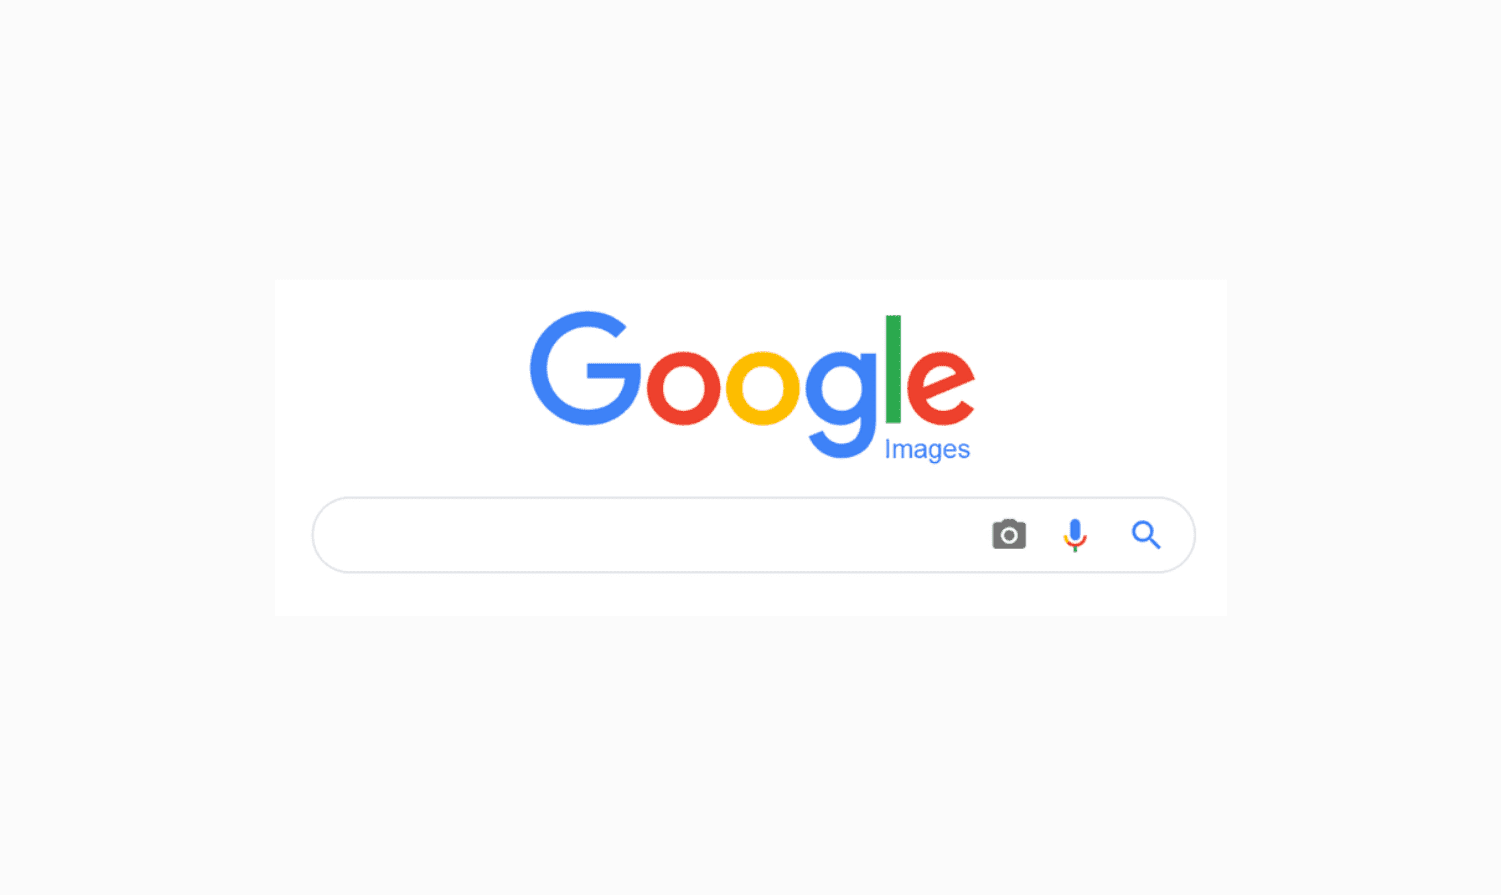 Google homepage with search bar.